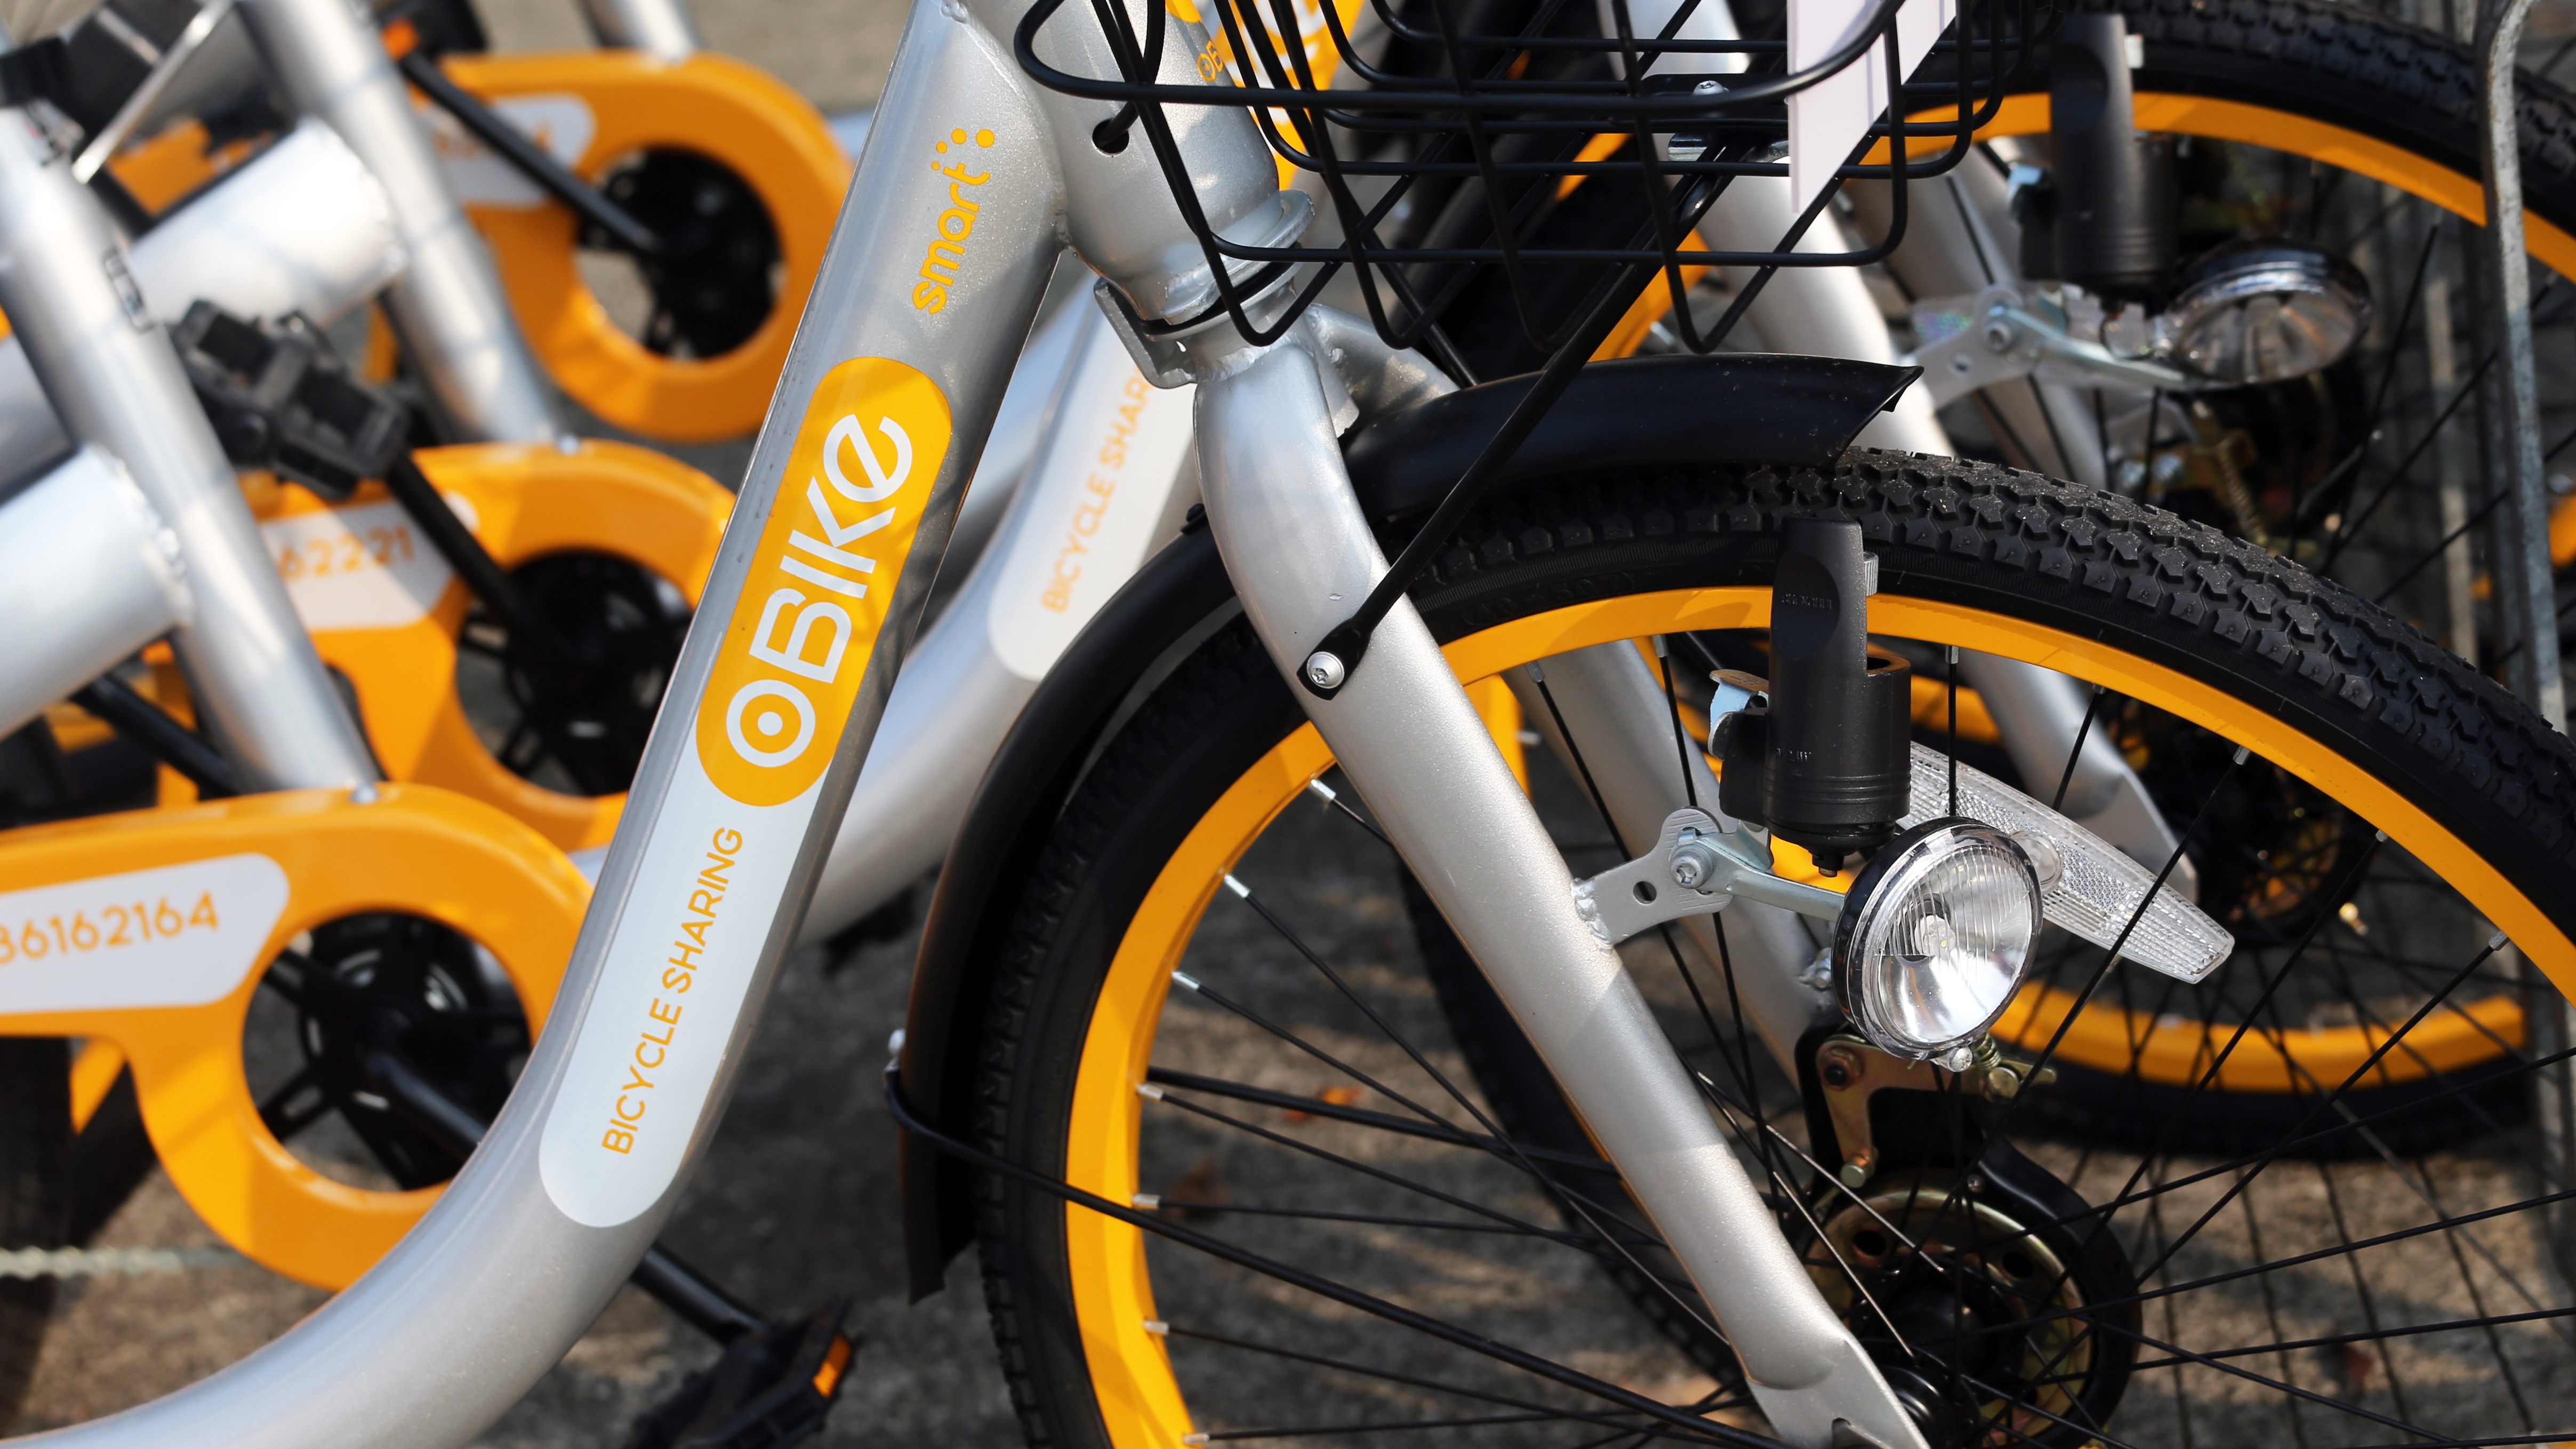 oBike launched in Hong Kong on Friday. Photo: David Wong